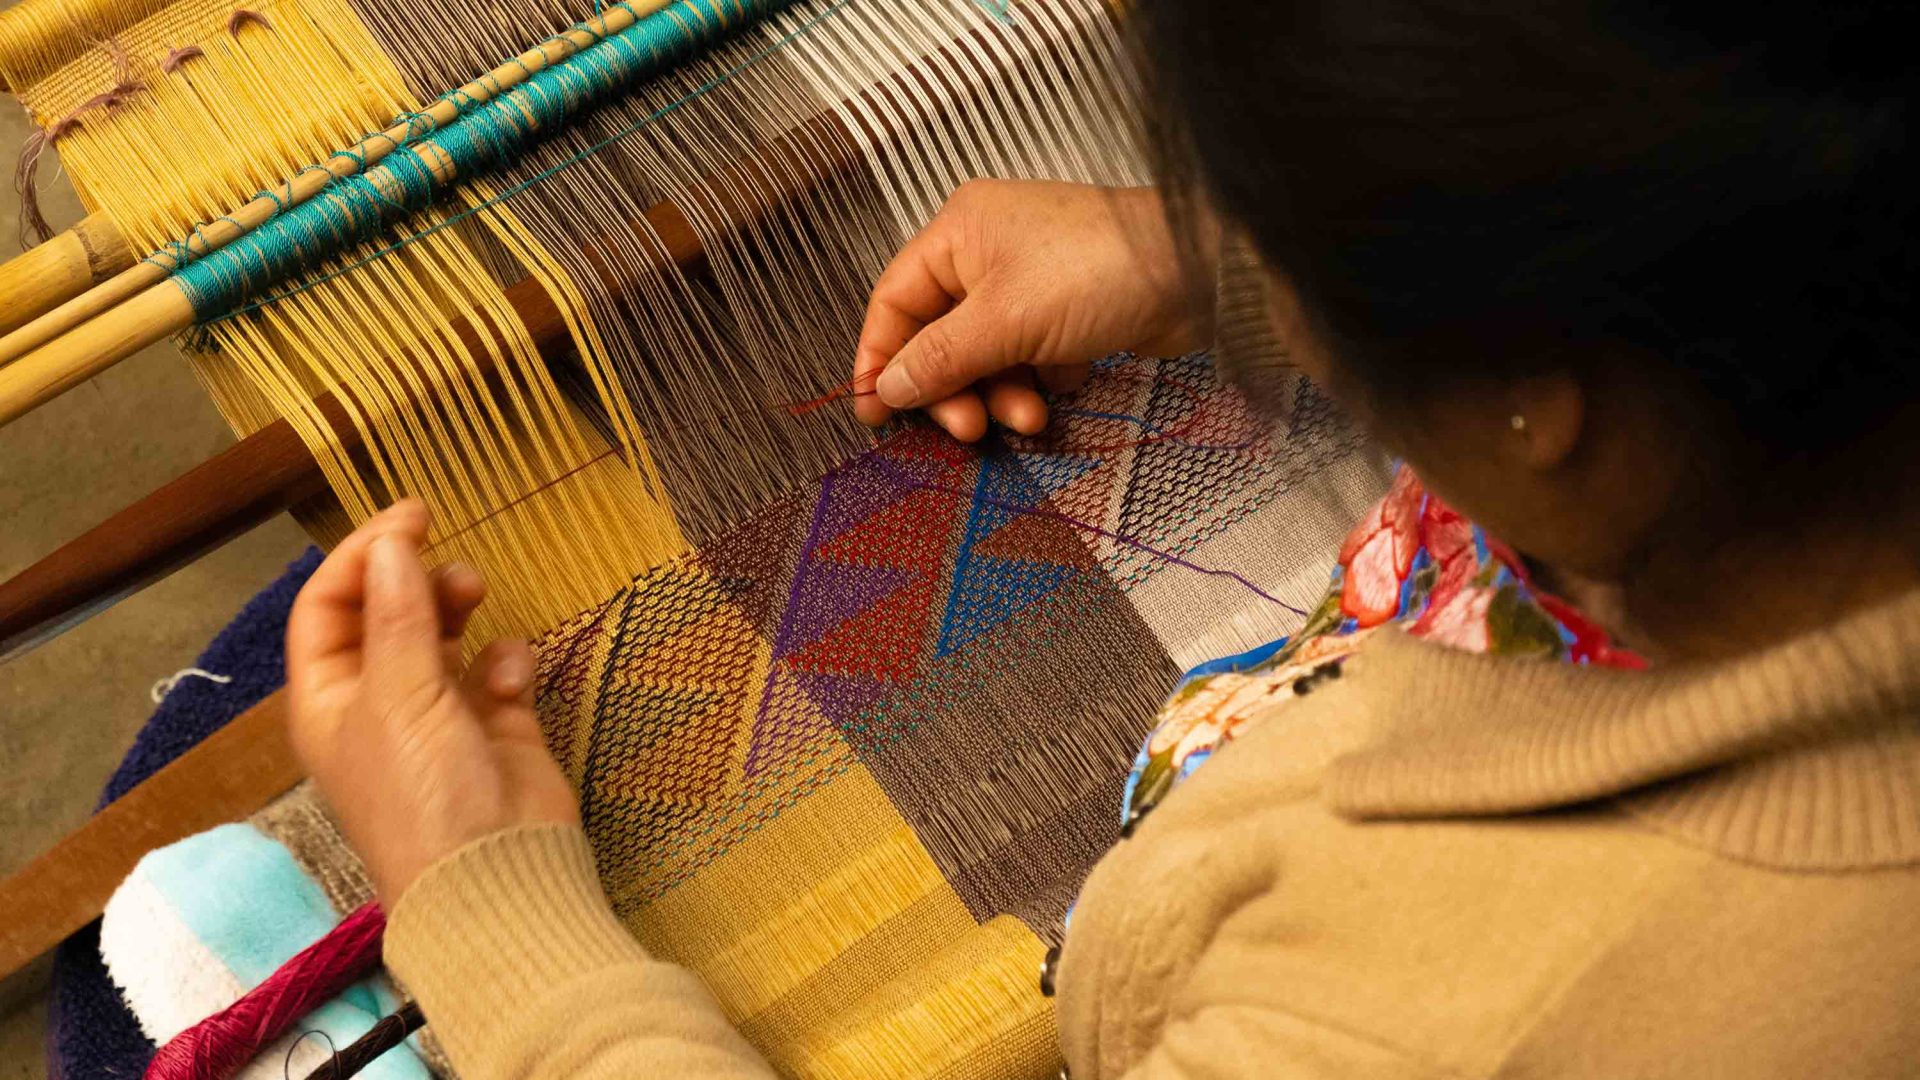 A person uses a loom to sew a colorful garment.